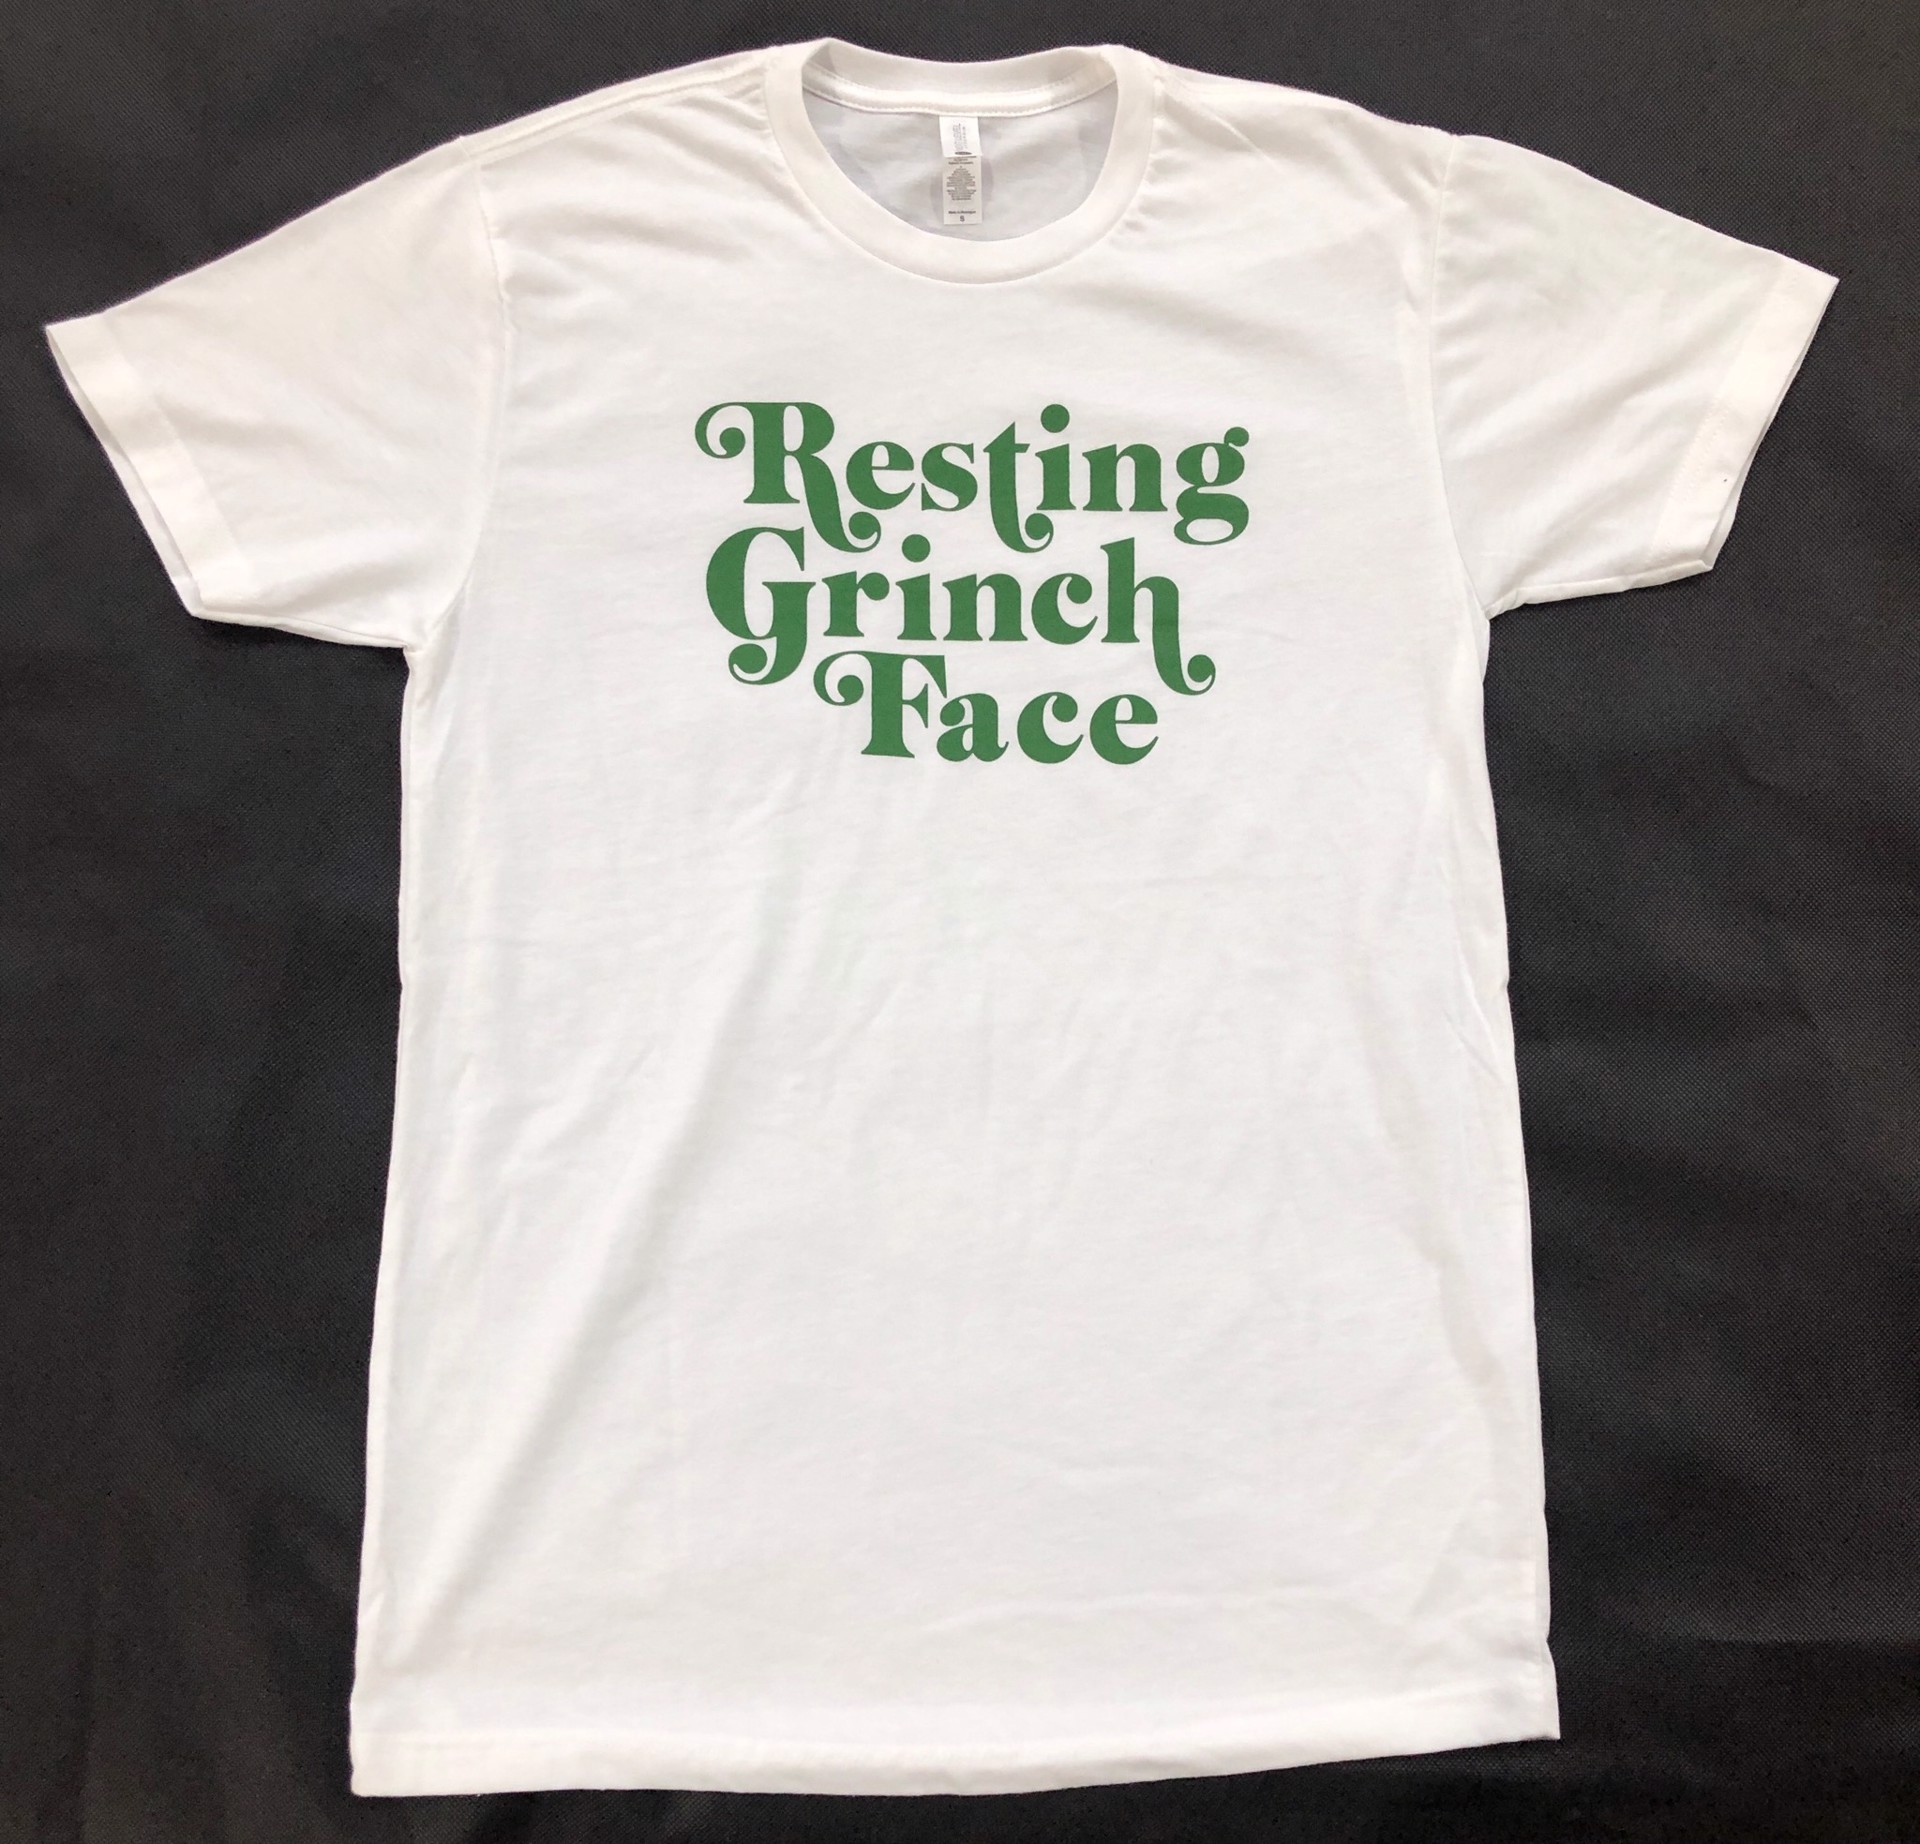 Resting Grinch Face Shirt - L by Exclusive Collections